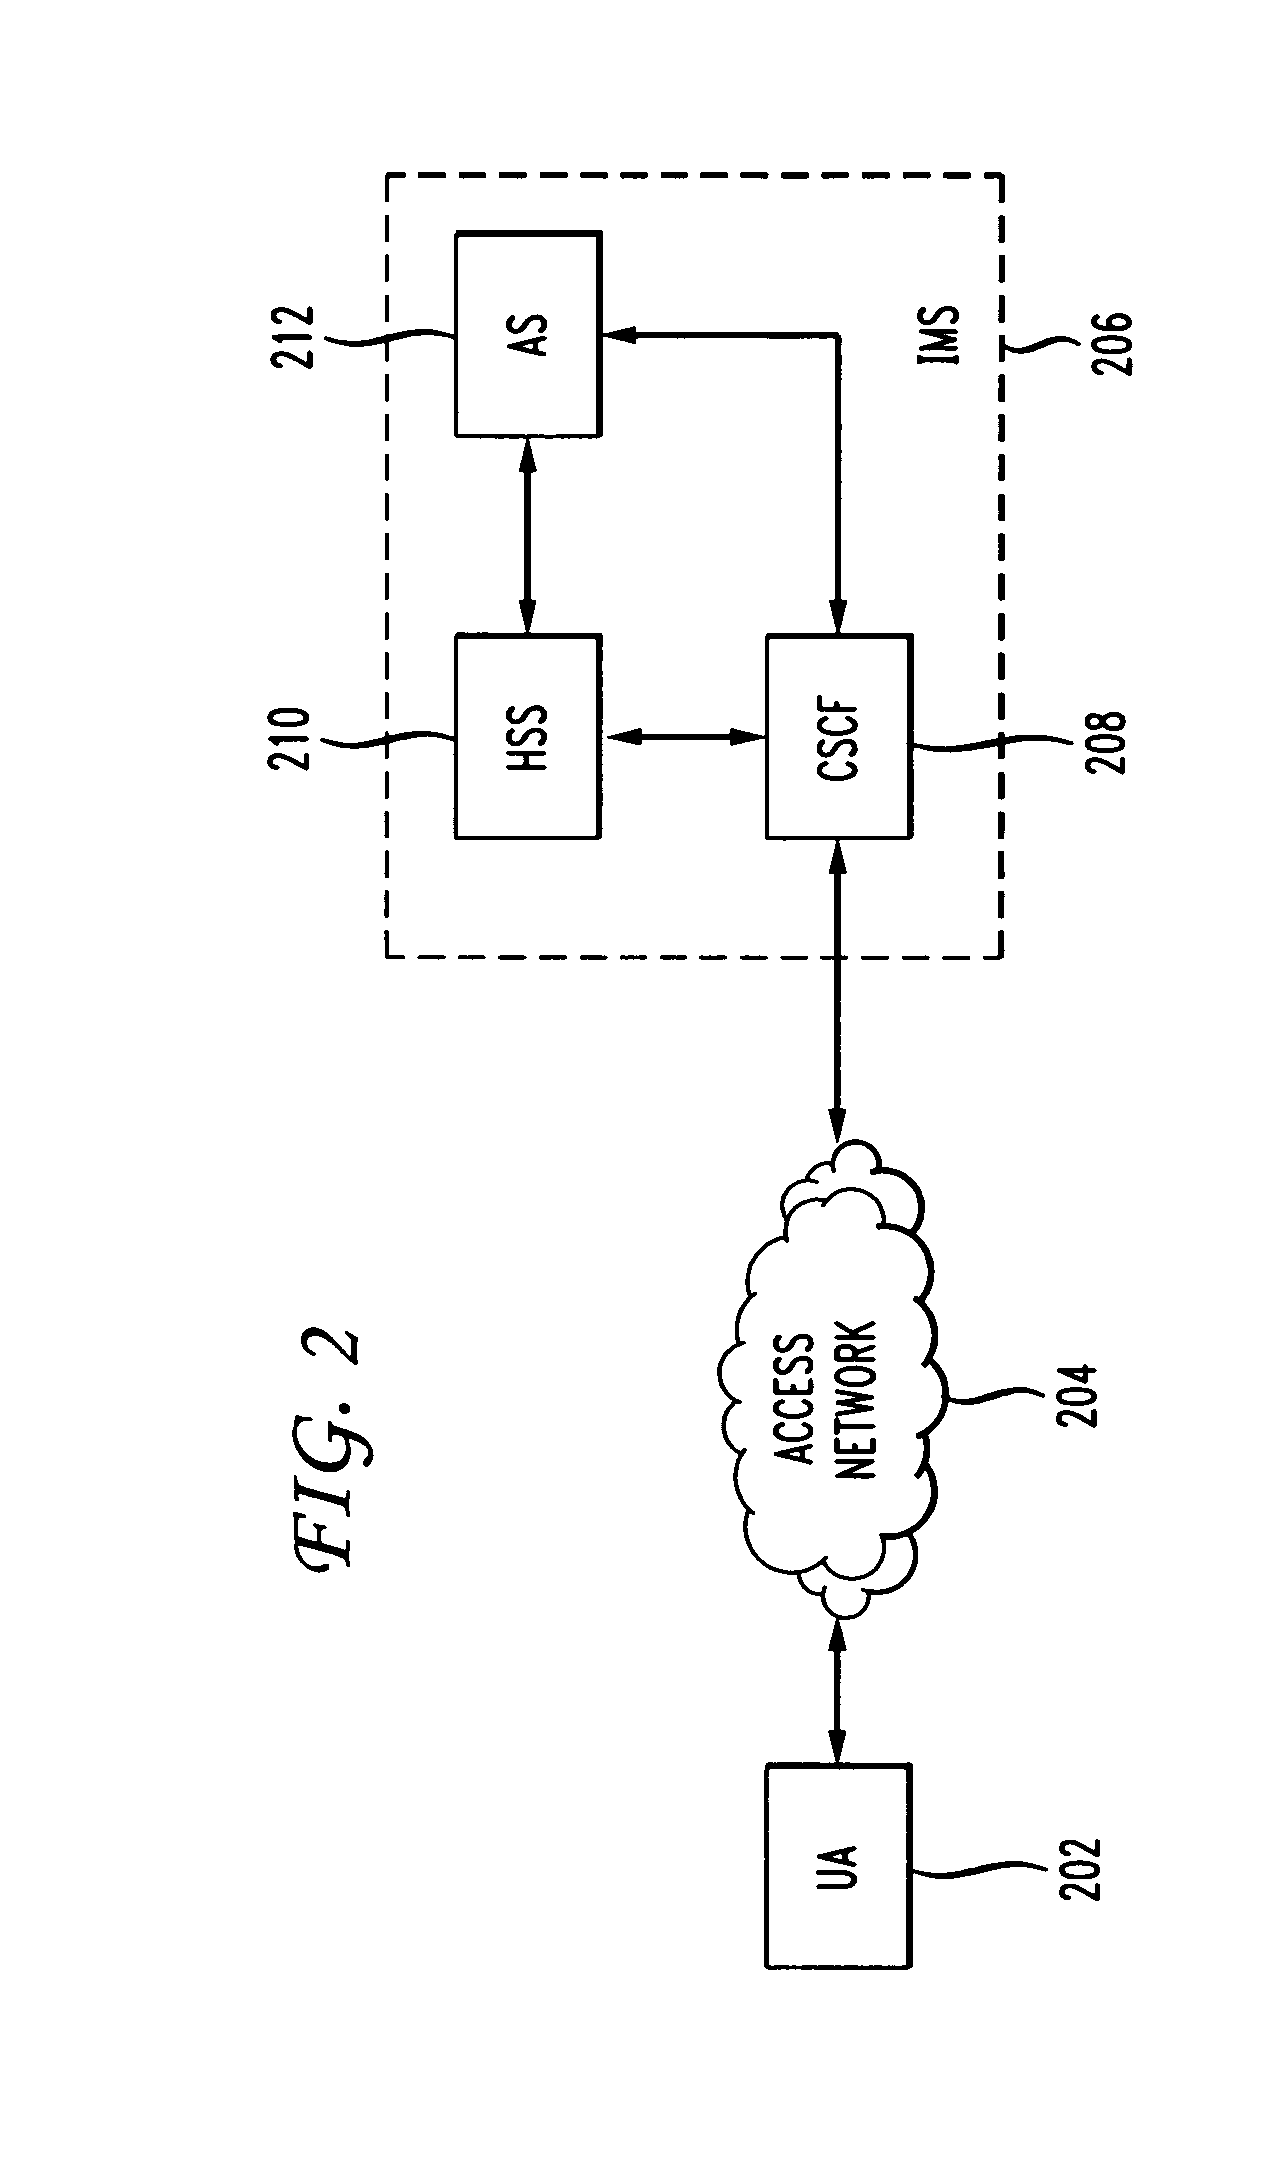 Application load distribution system in packet data networks